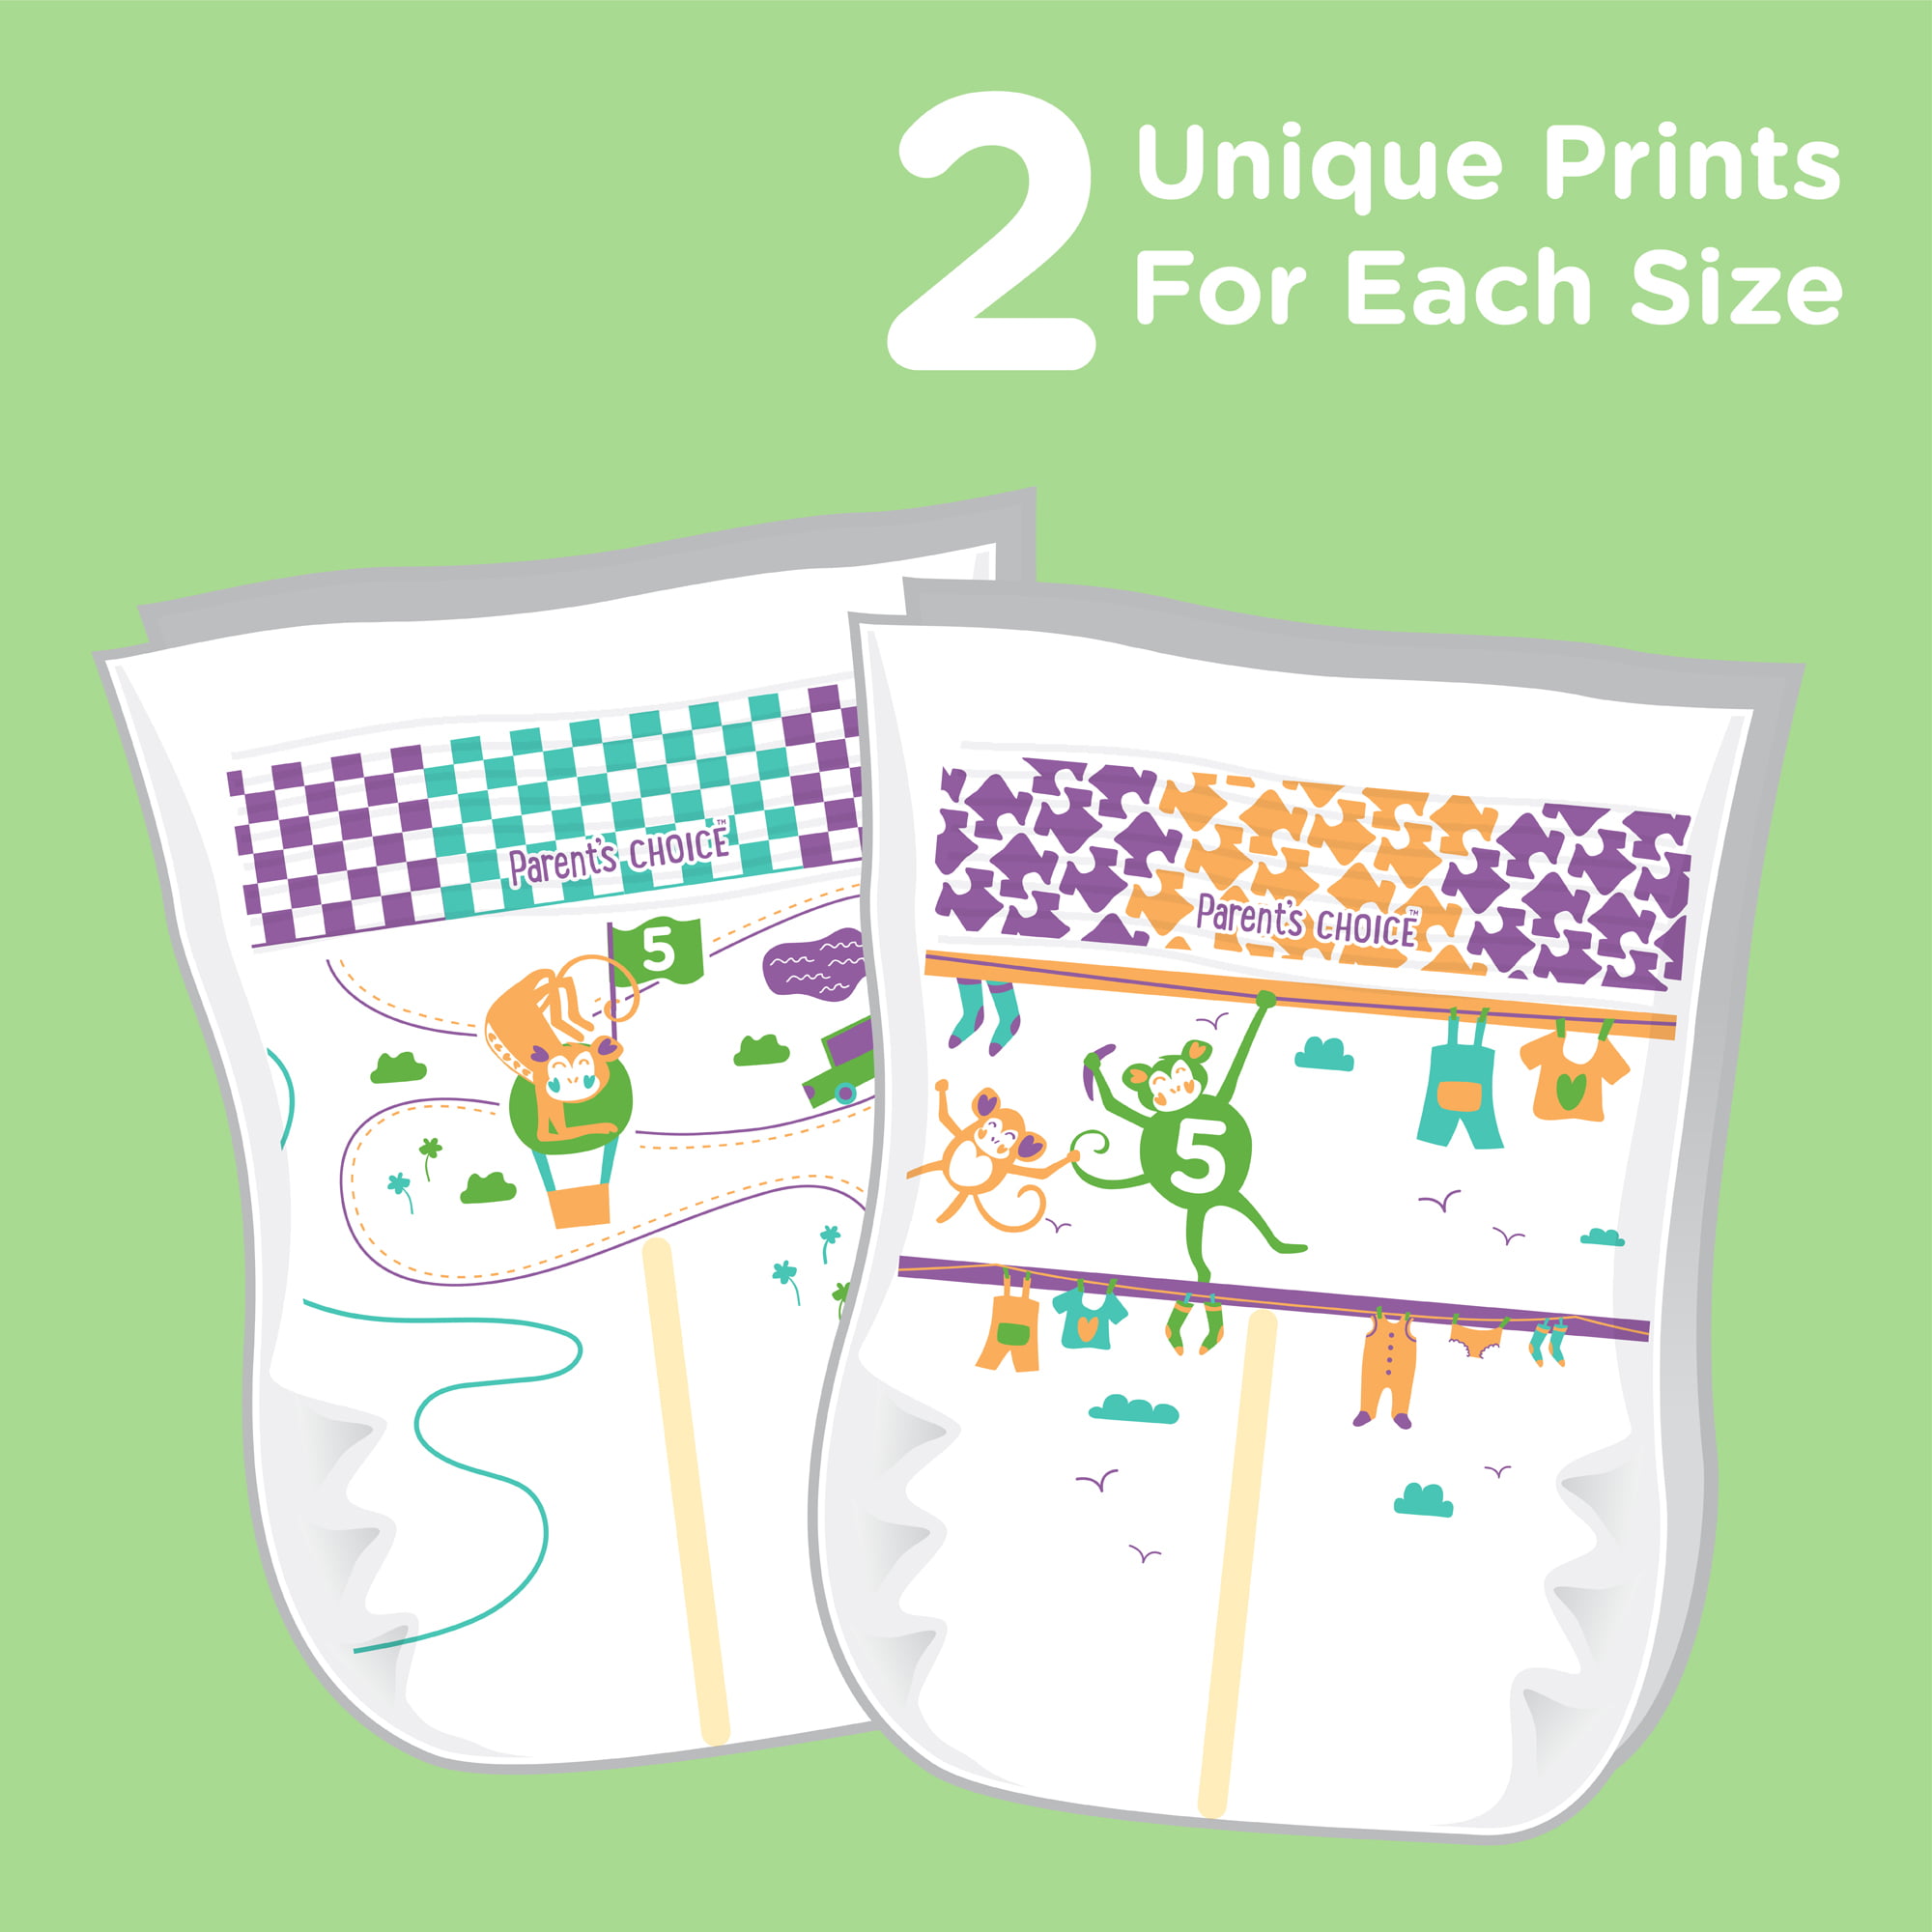 parents choice diapers size 5 small pack